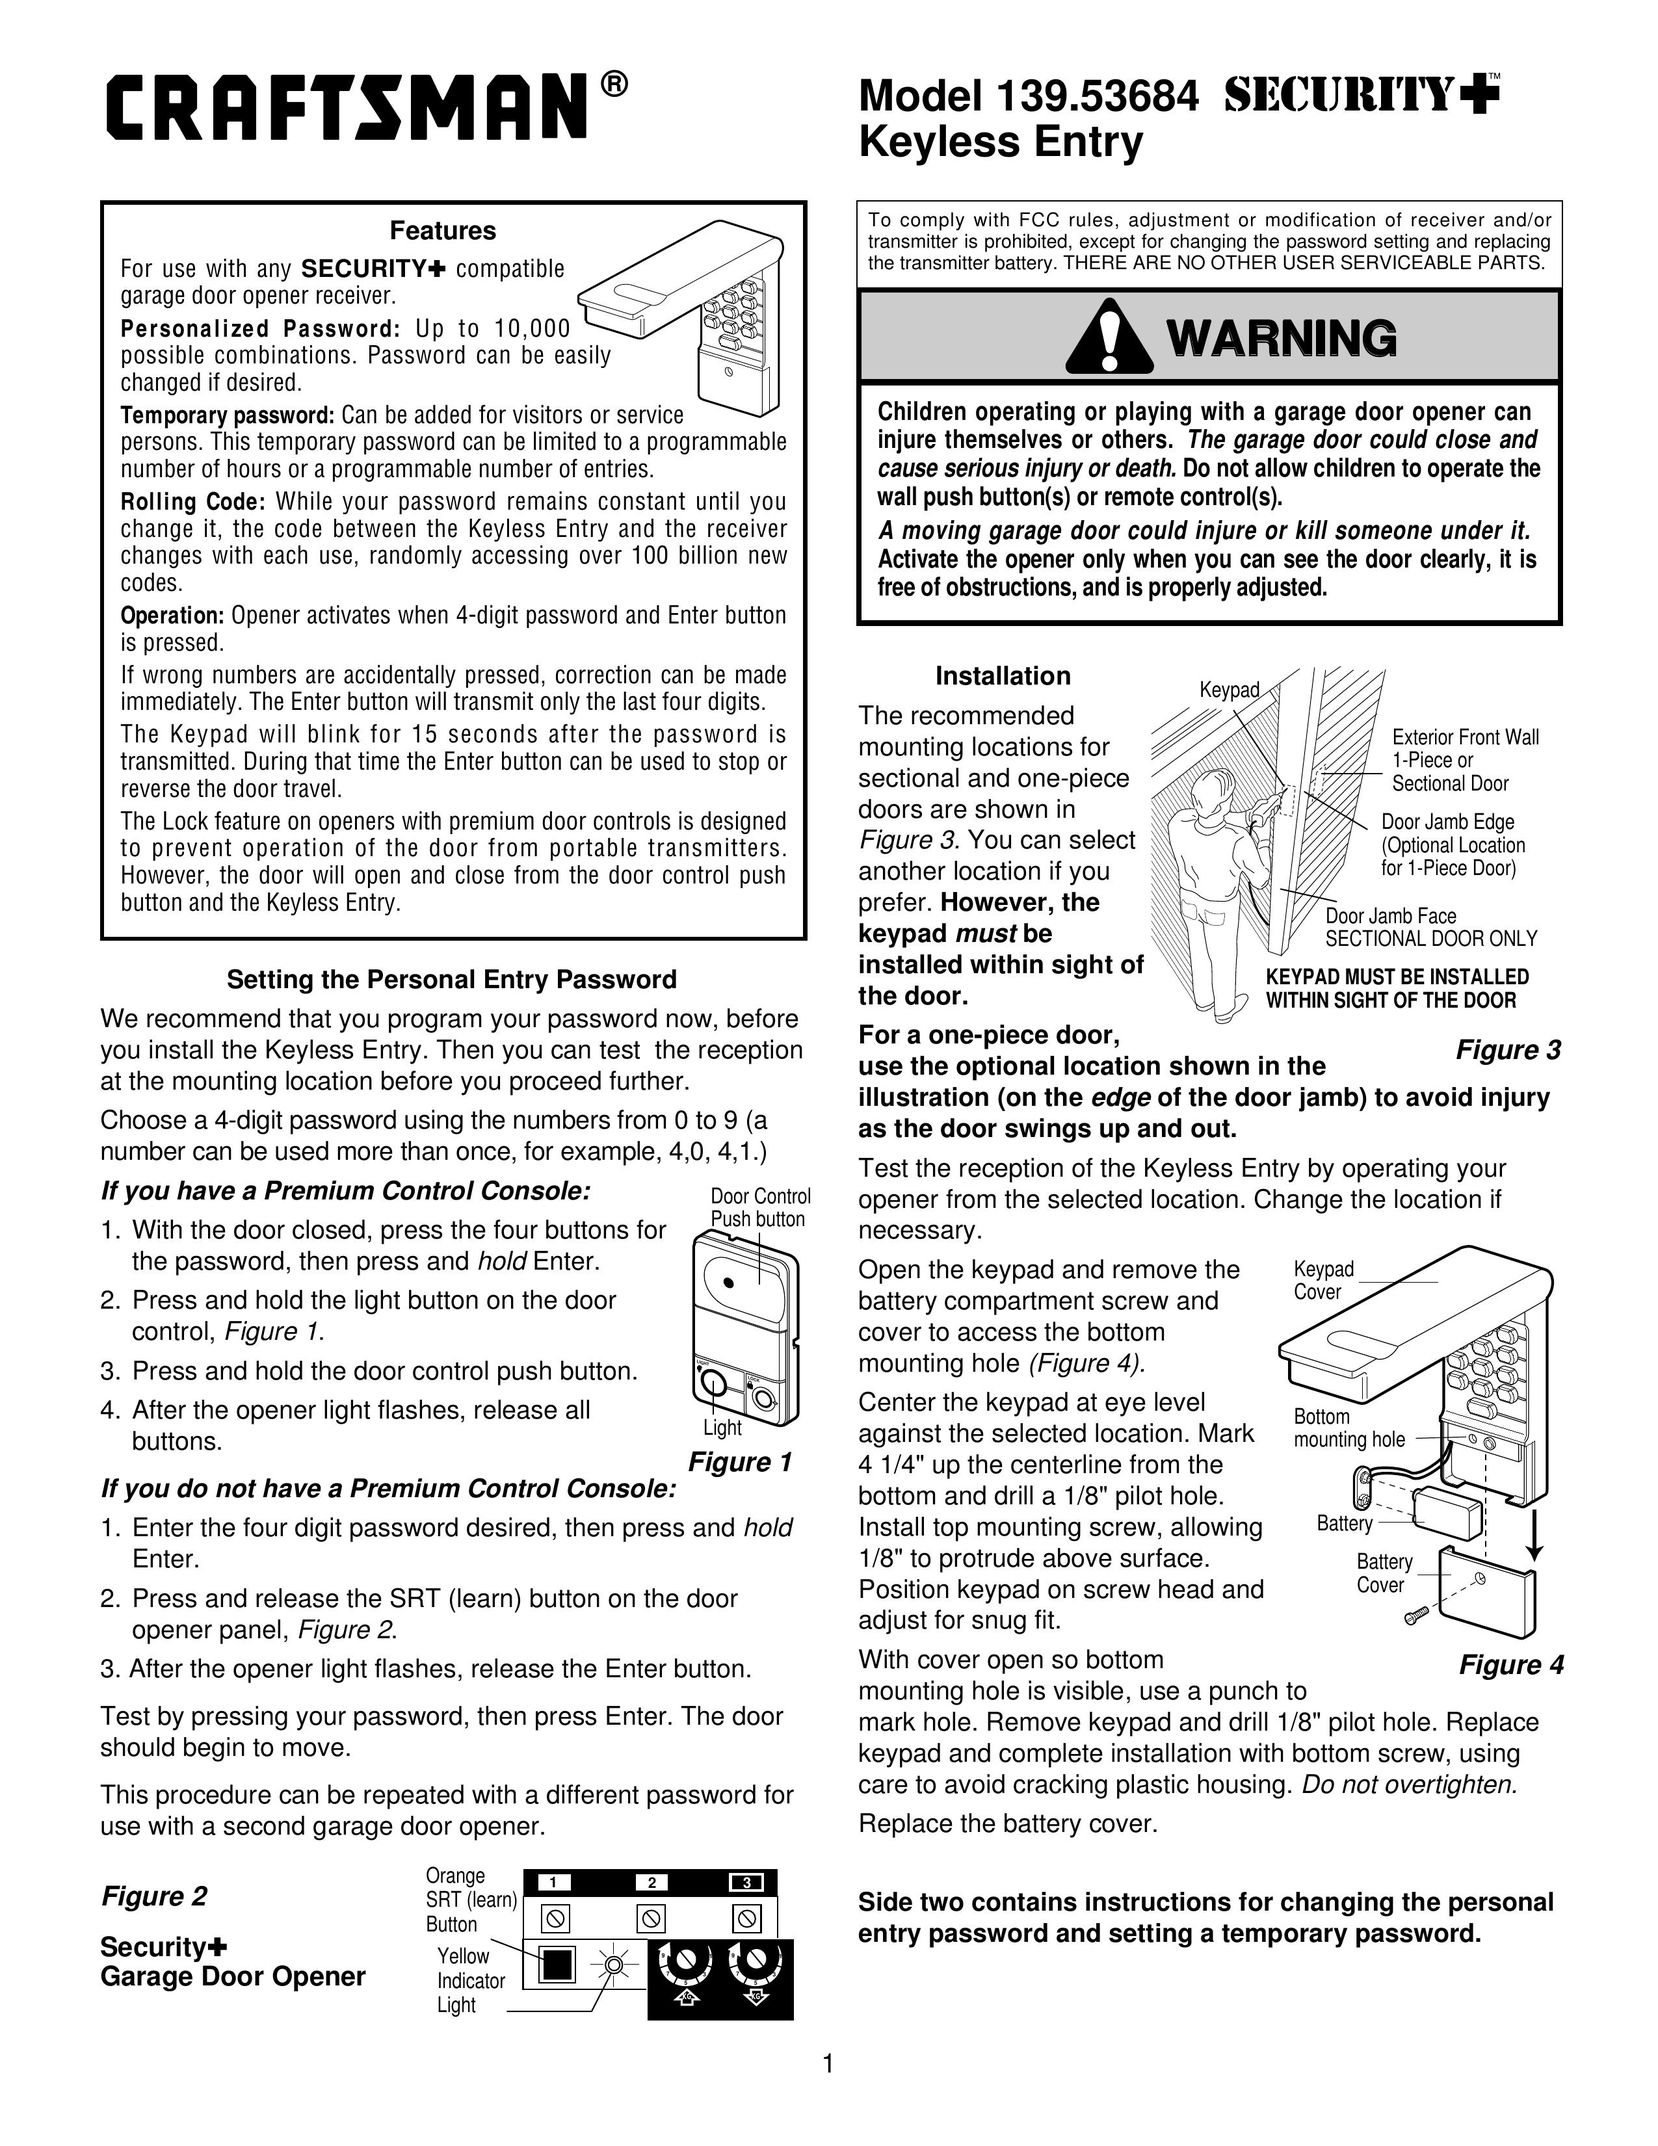 Craftsman 139.53684 Home Security System User Manual